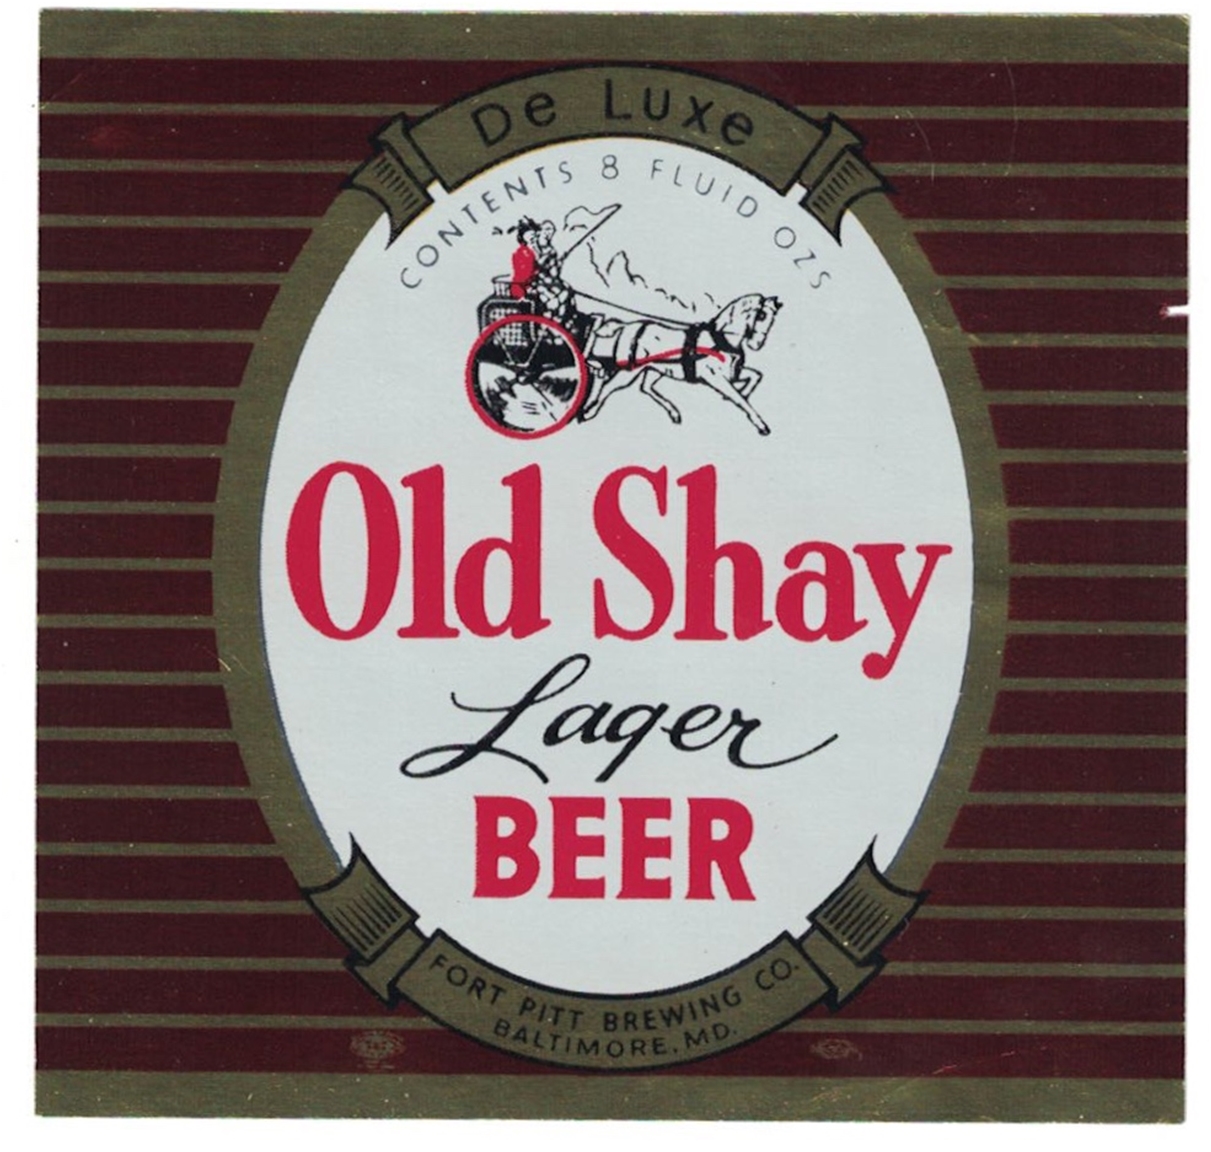 Old Shay Lager Beer Label